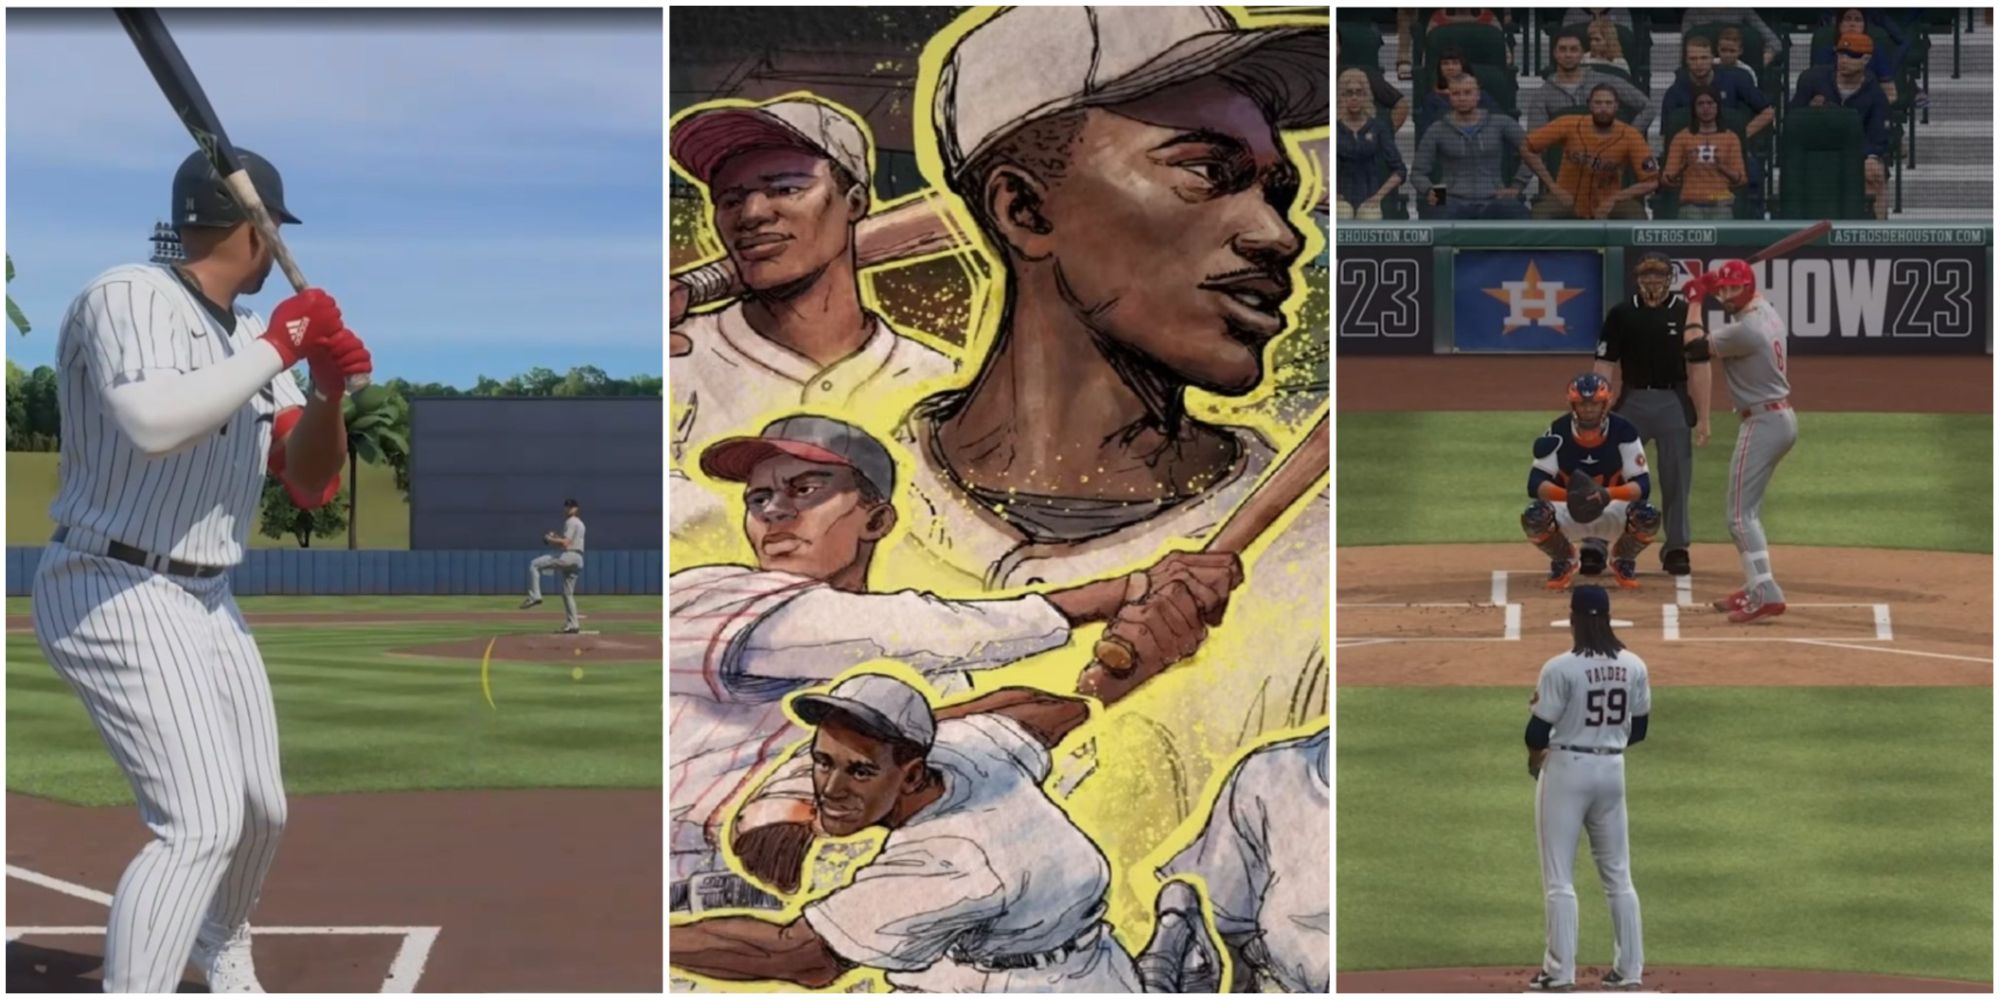 MLB The Show 23 Guide: Gameplay Tips and Tricks, Diamond Dynasty